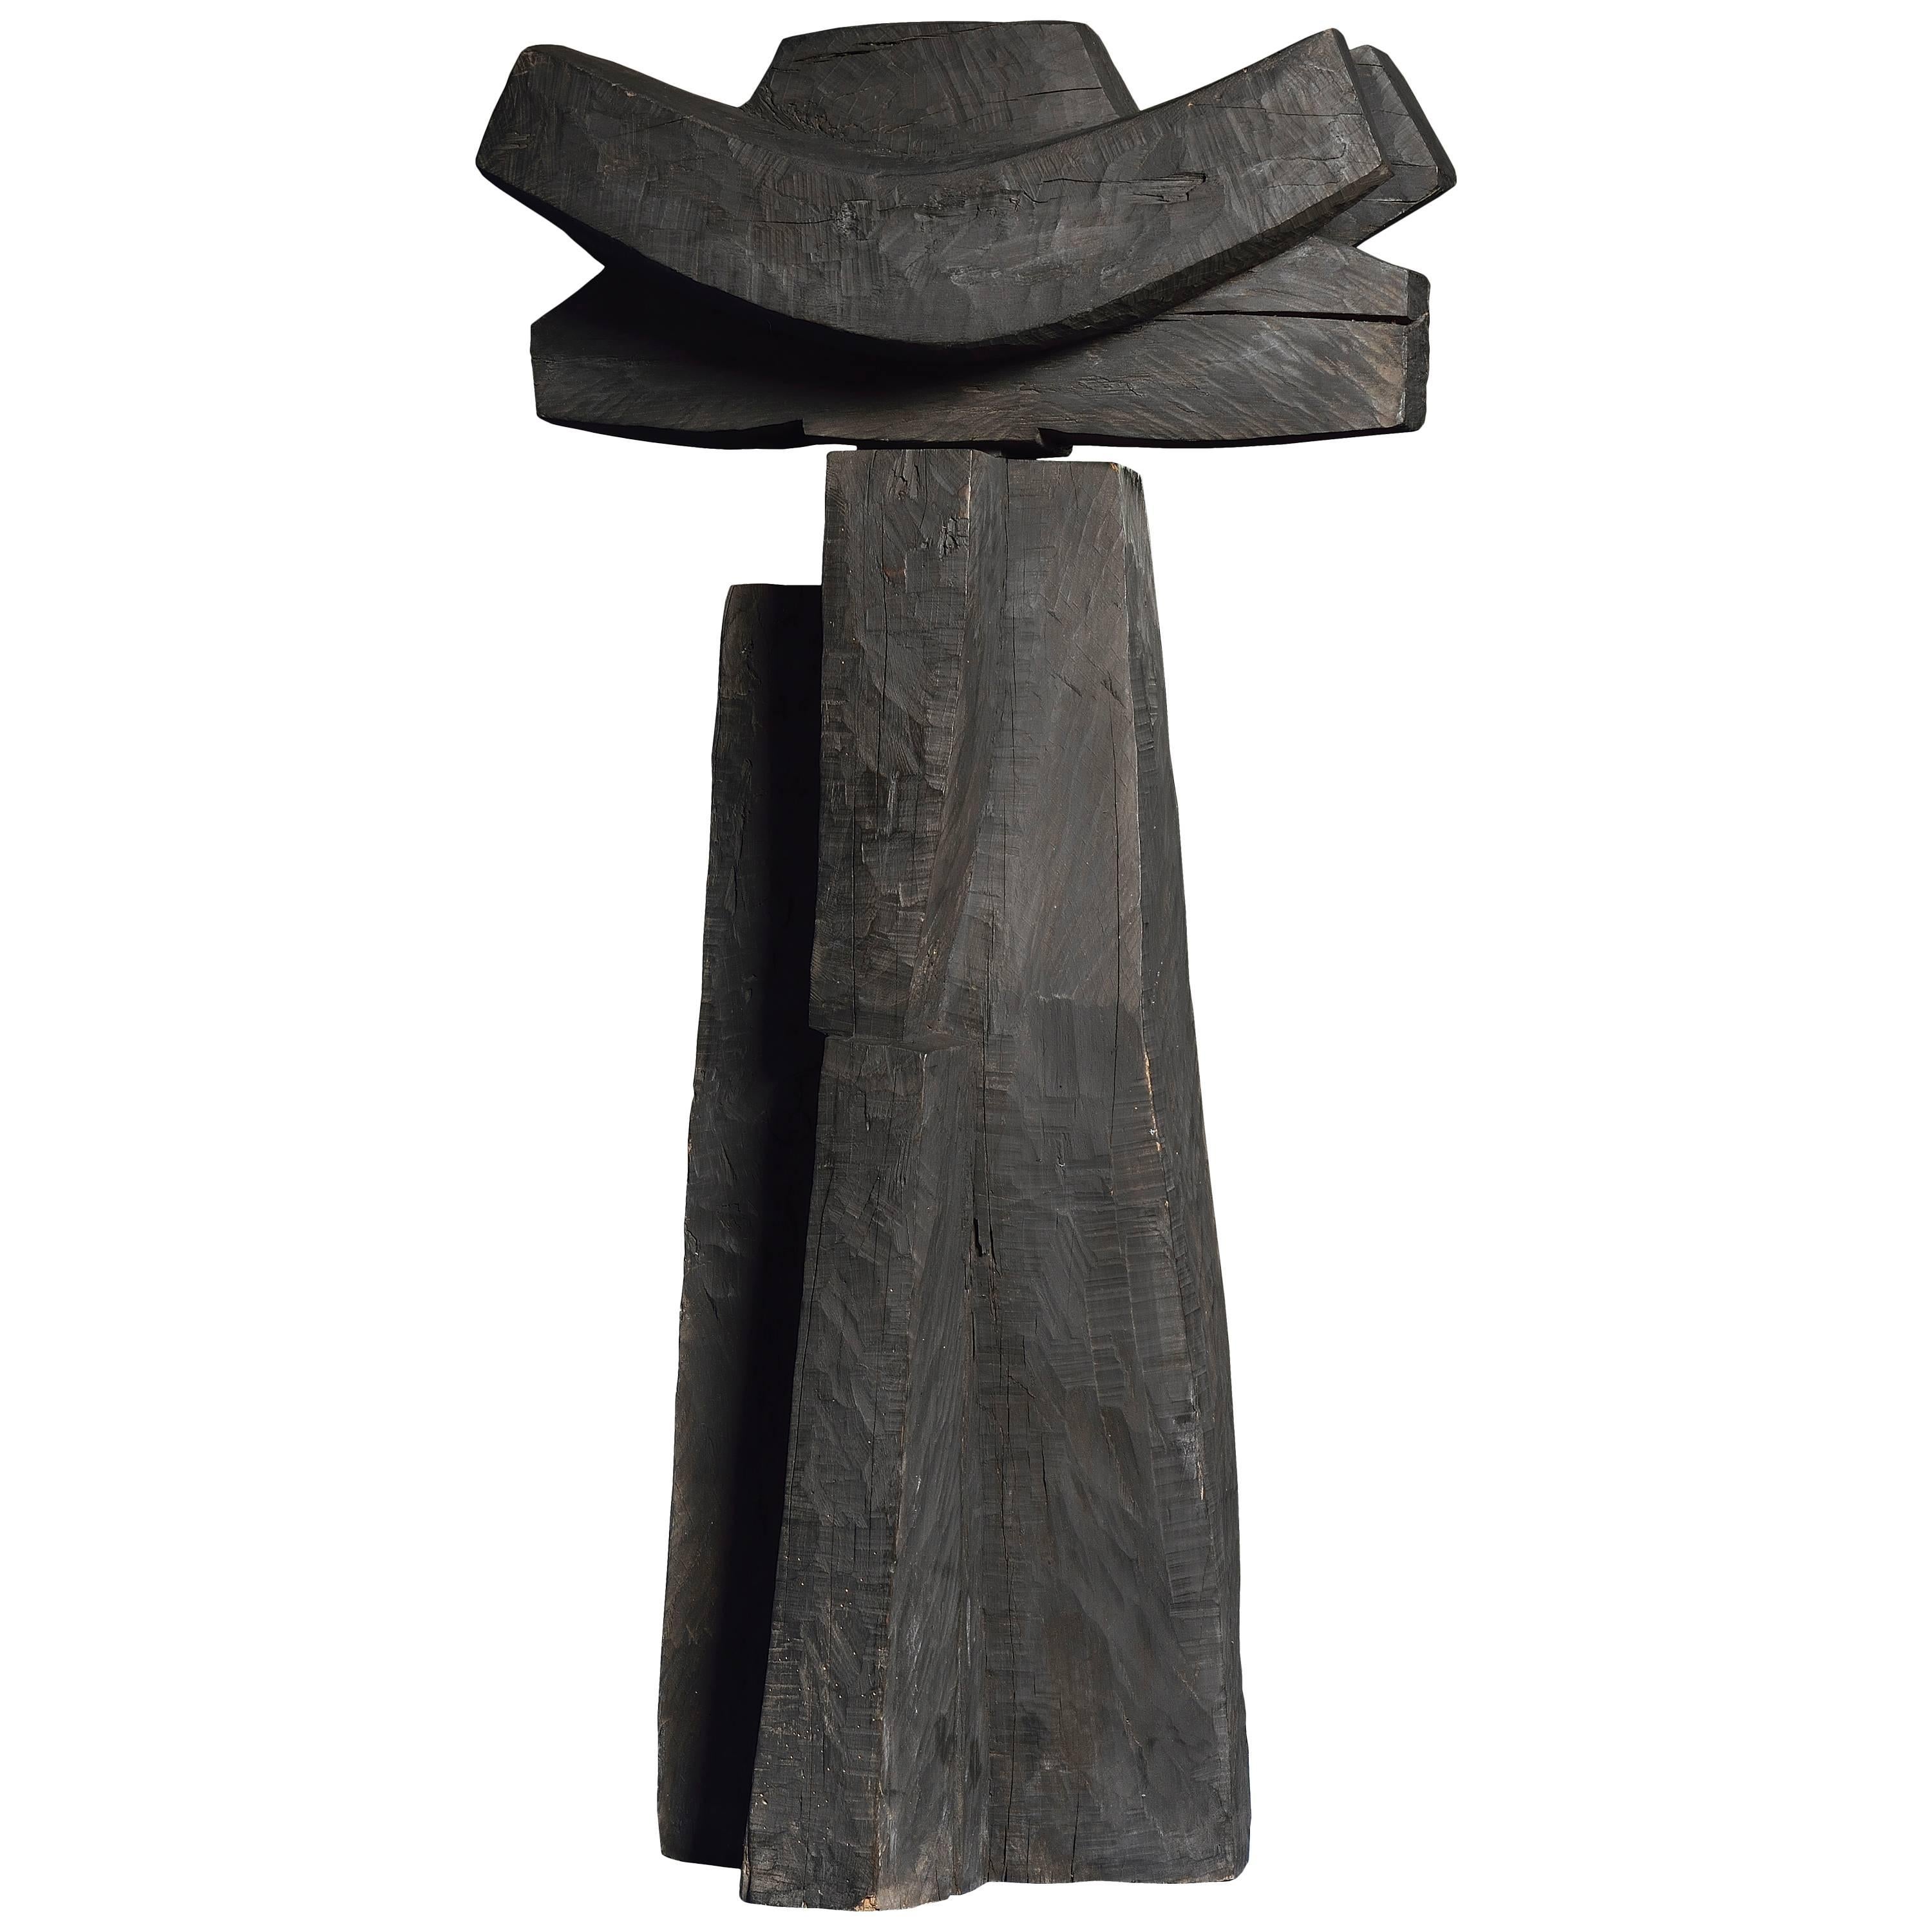 Wood Sculpture, Totem by Oehm Dieter, circa 1970 For Sale